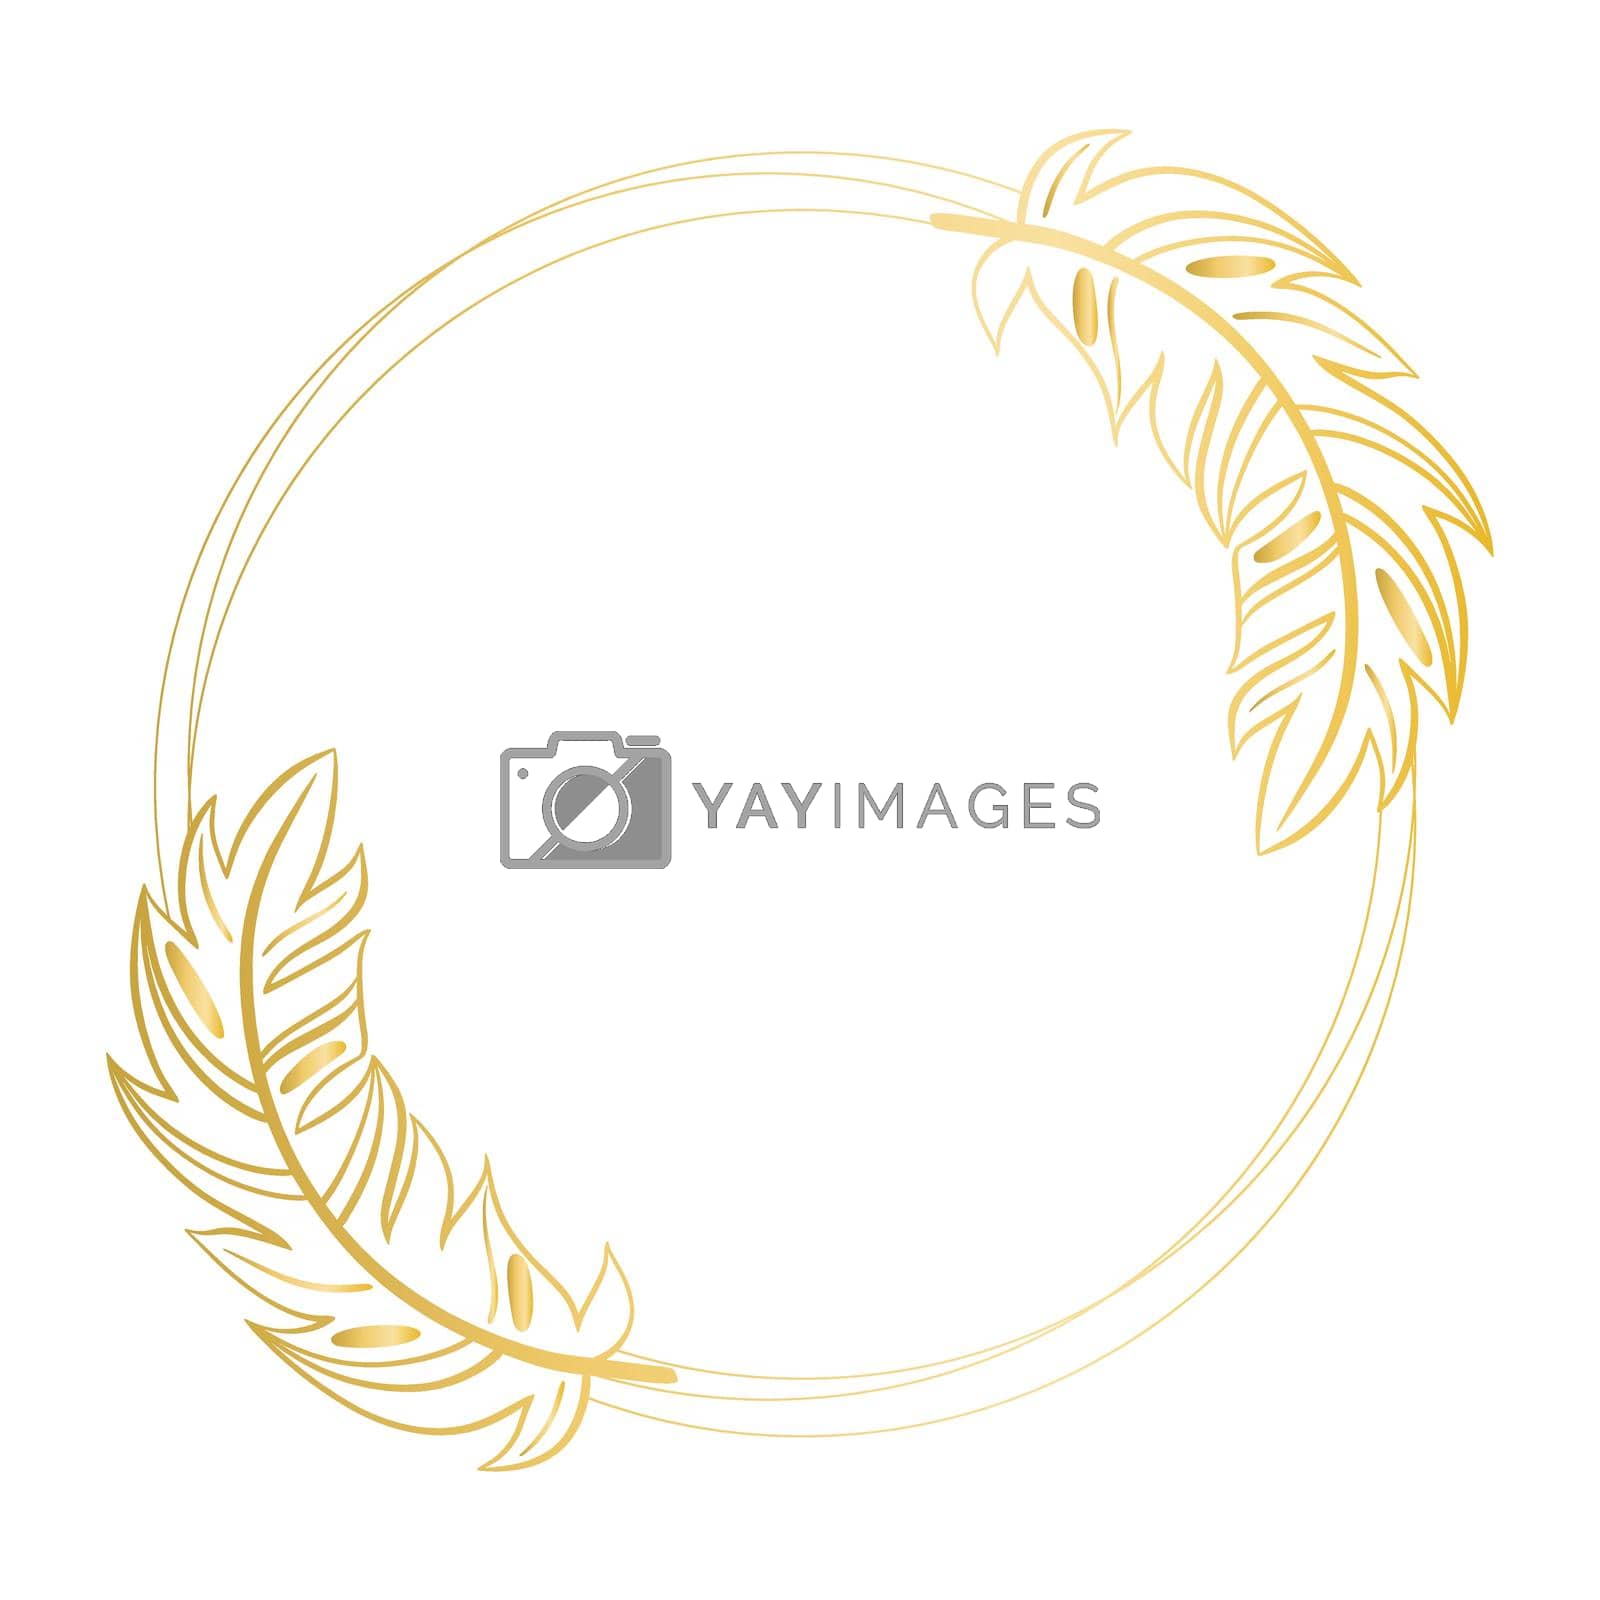 Royalty free image of Graceful golden round frame with feathers by TassiaK